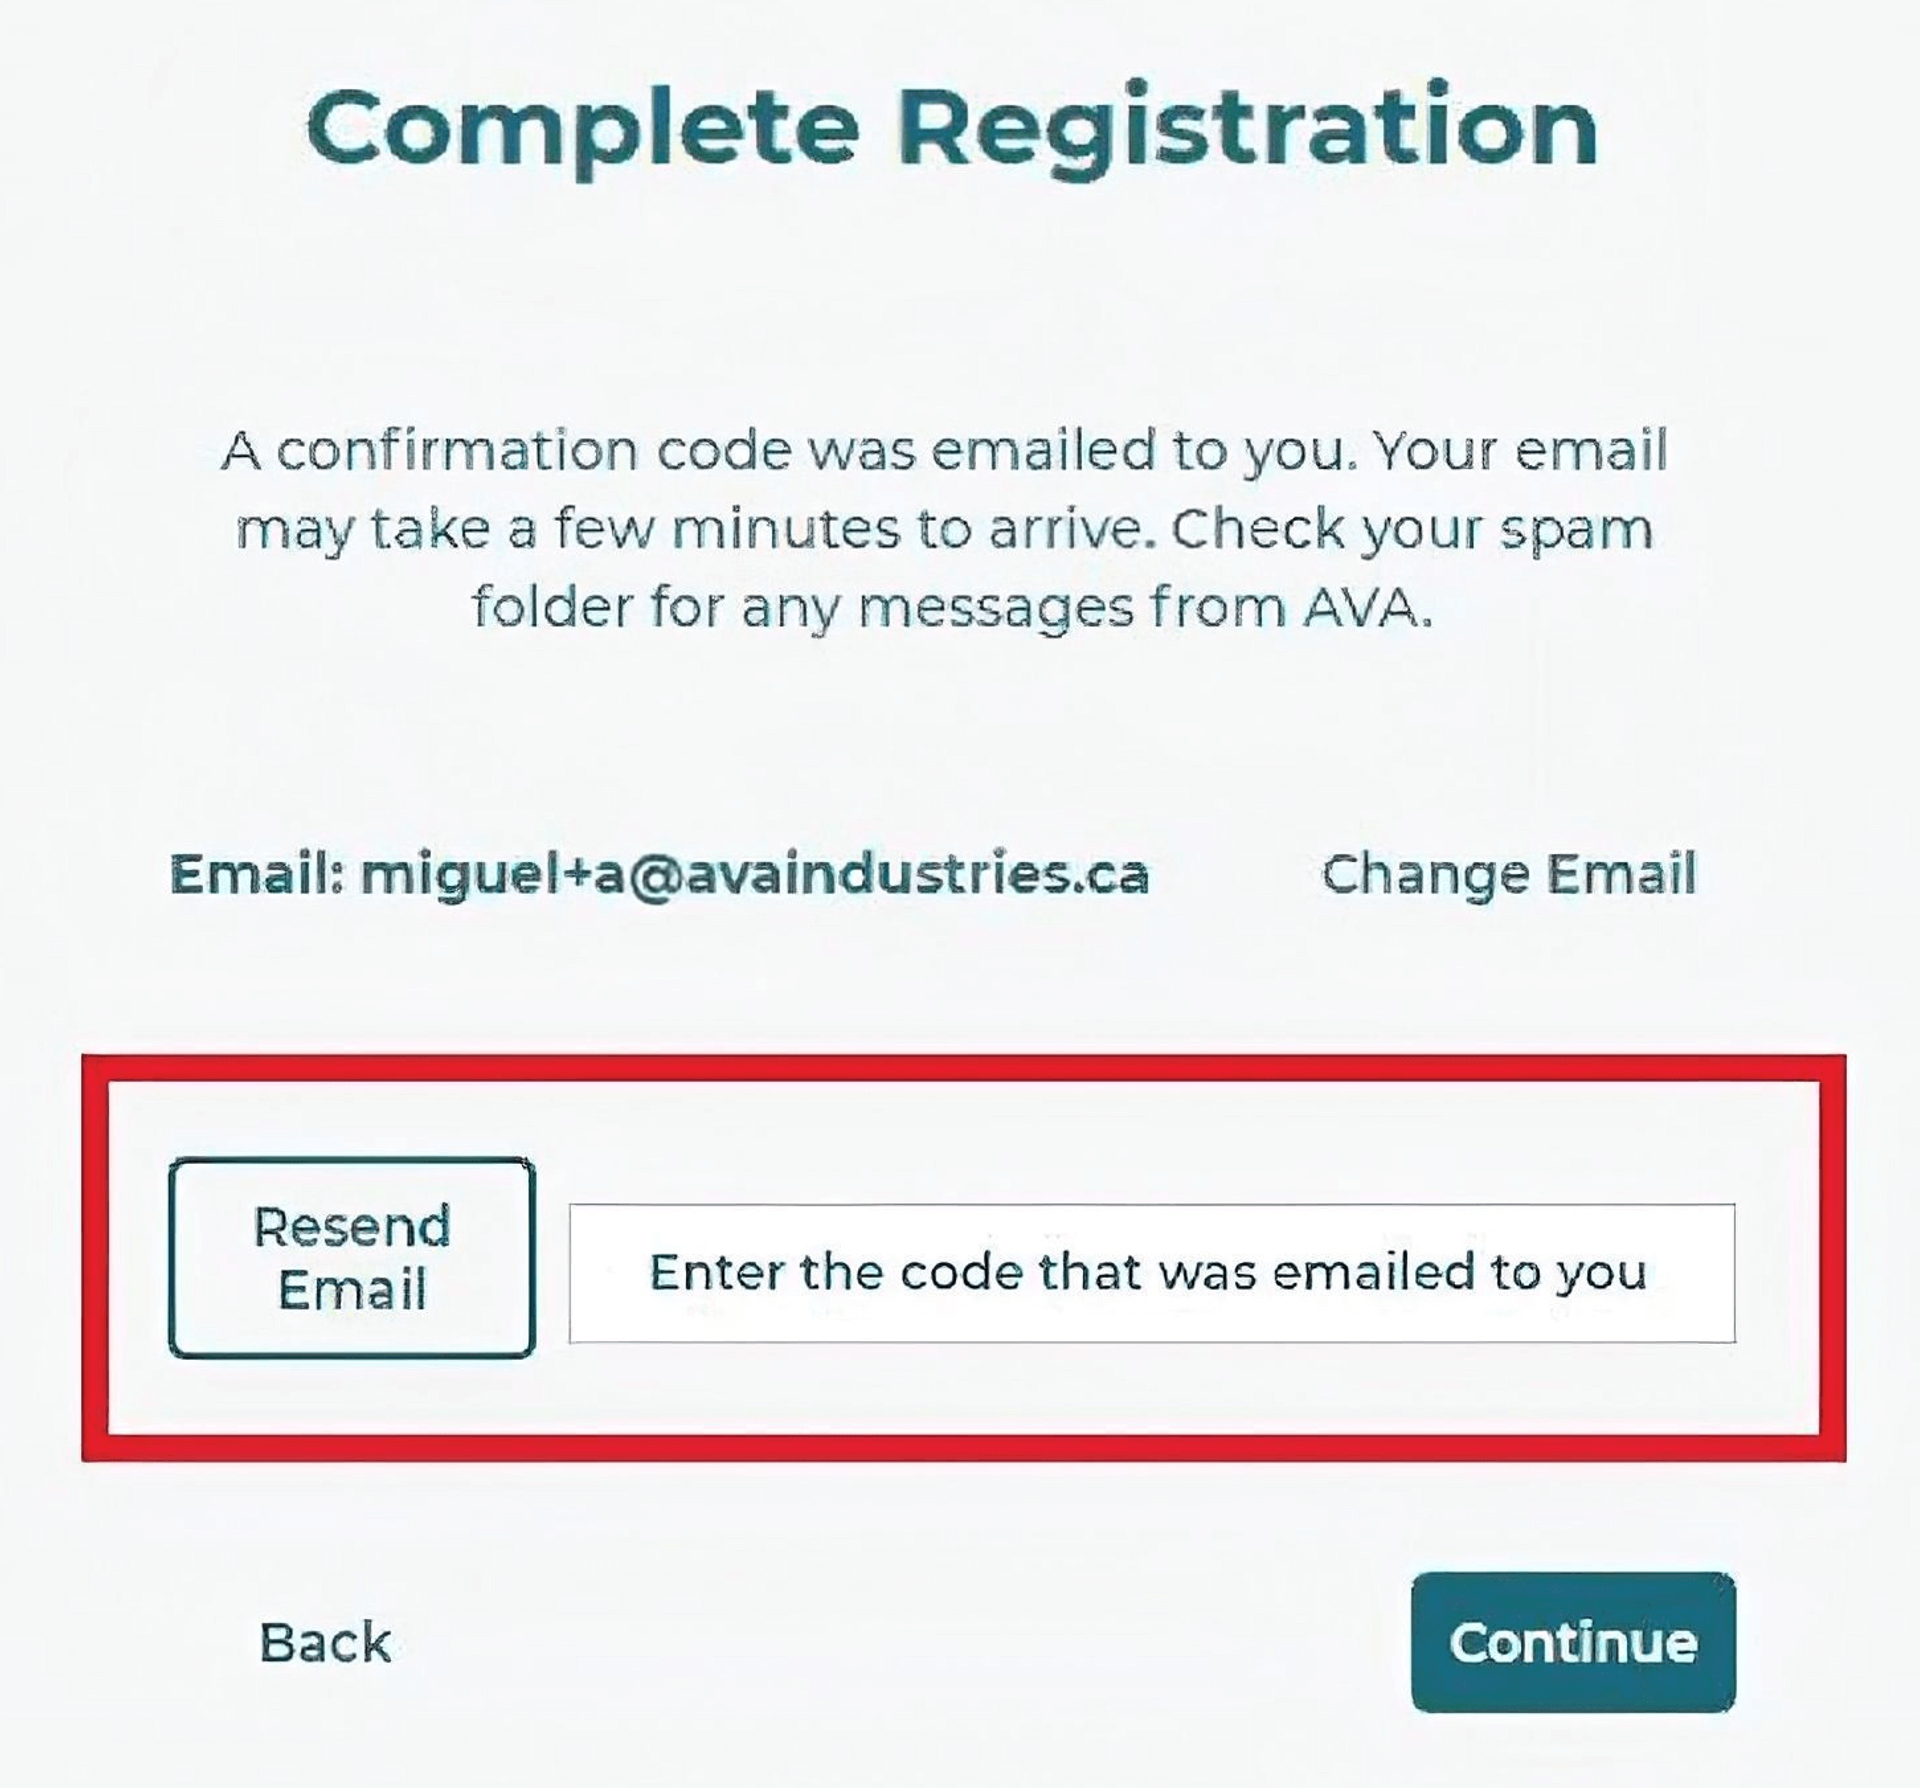 Complete Registration window with a red box highlighting a button labeled 'Resend Email' and a form field labeled 'Enter the code that was emailed to you'